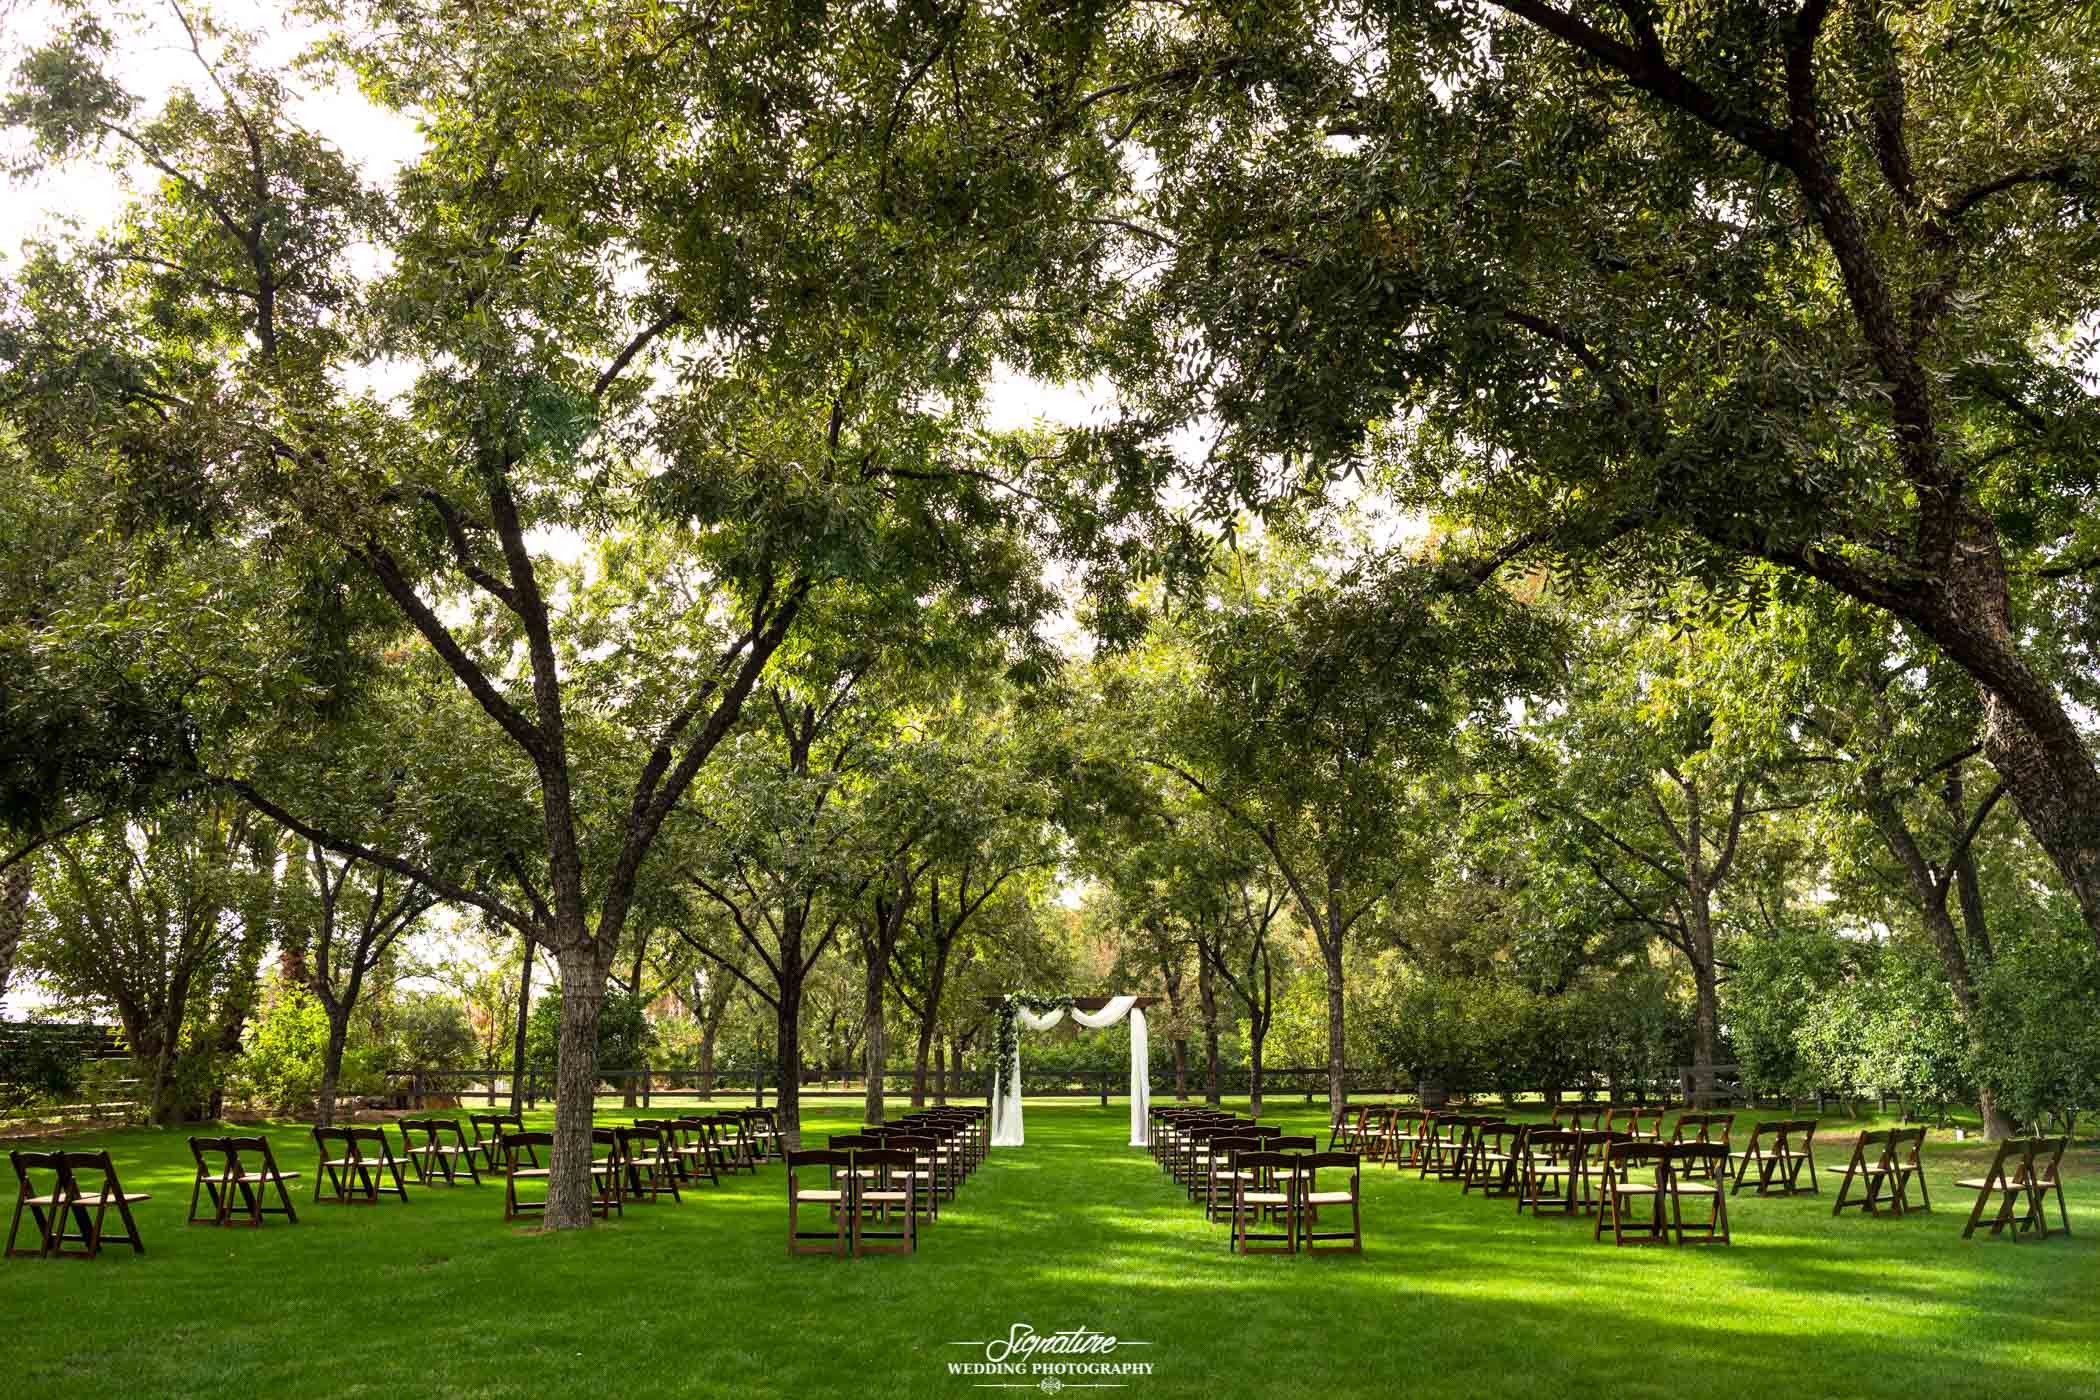 Wedding ceremony chairs and archway under tree canopy